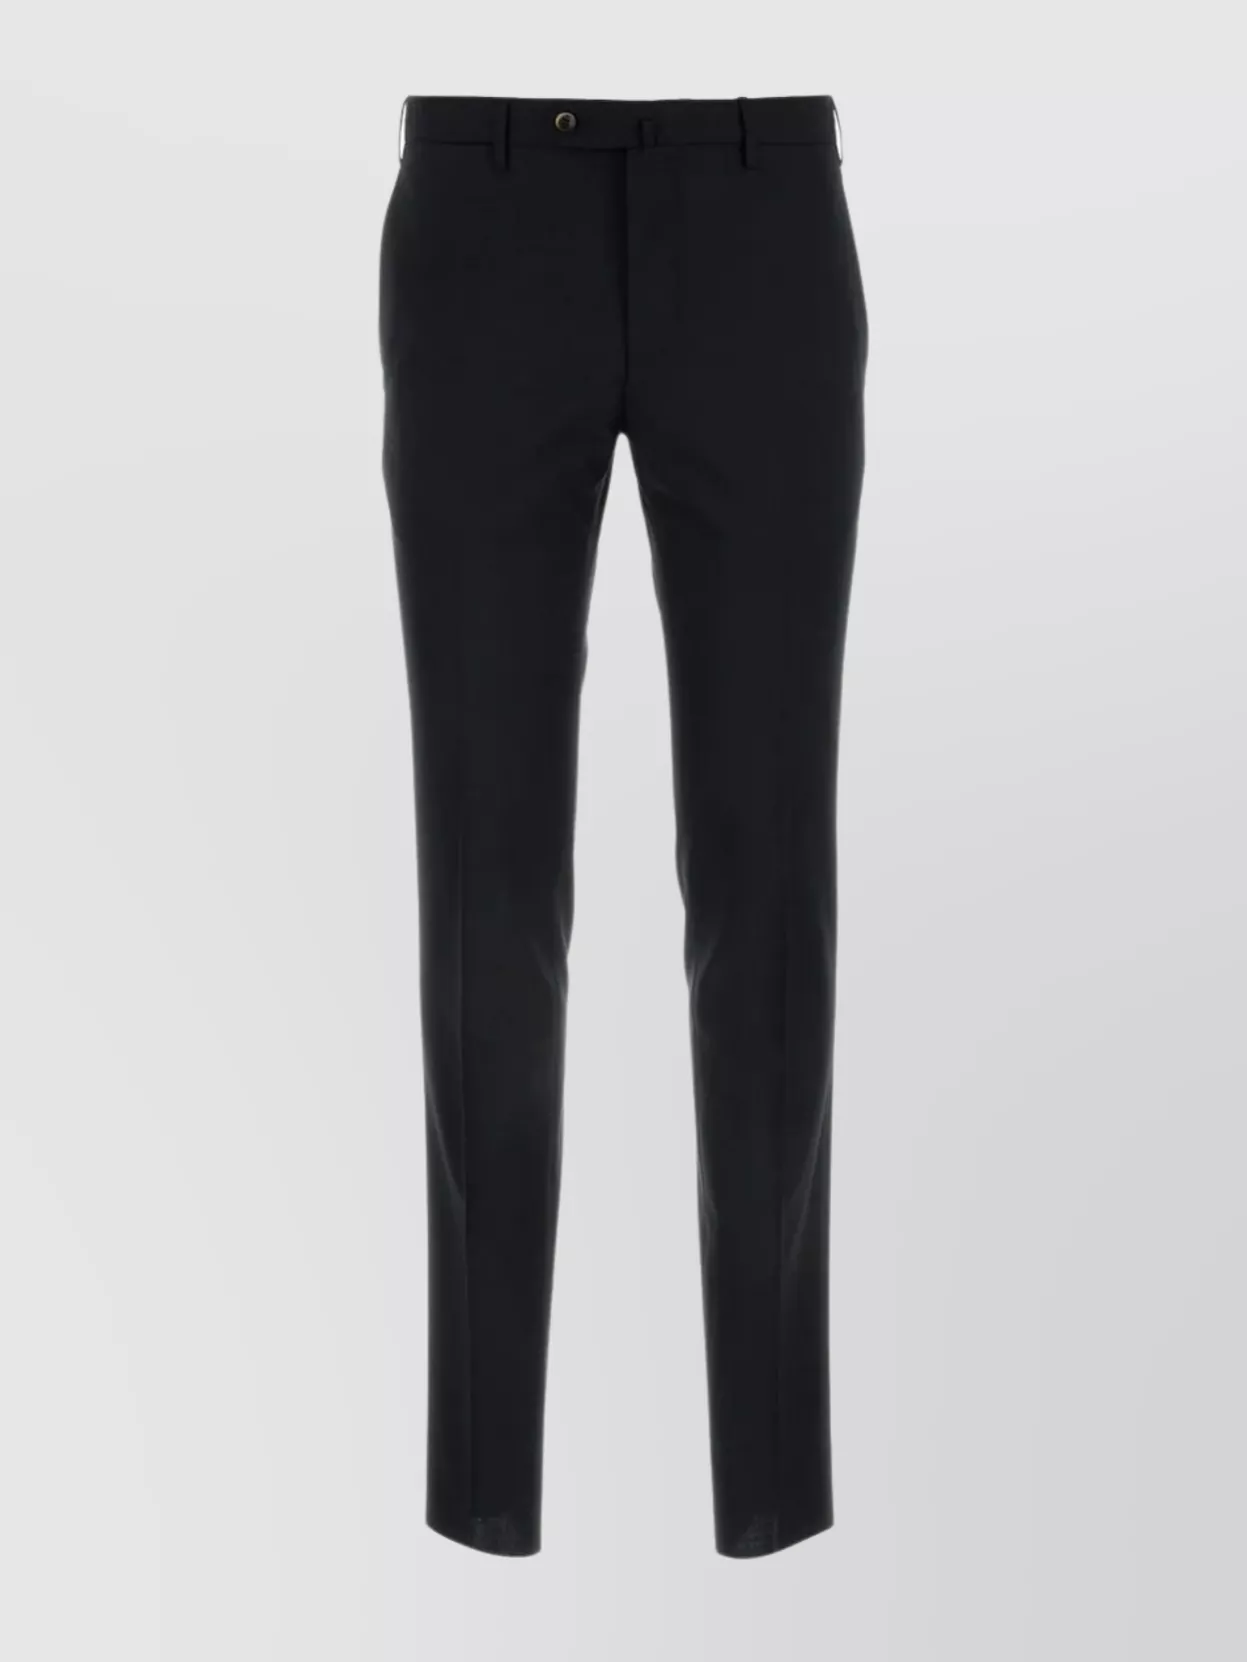 Shop Pt Torino Tailored Stretch Wool Trousers